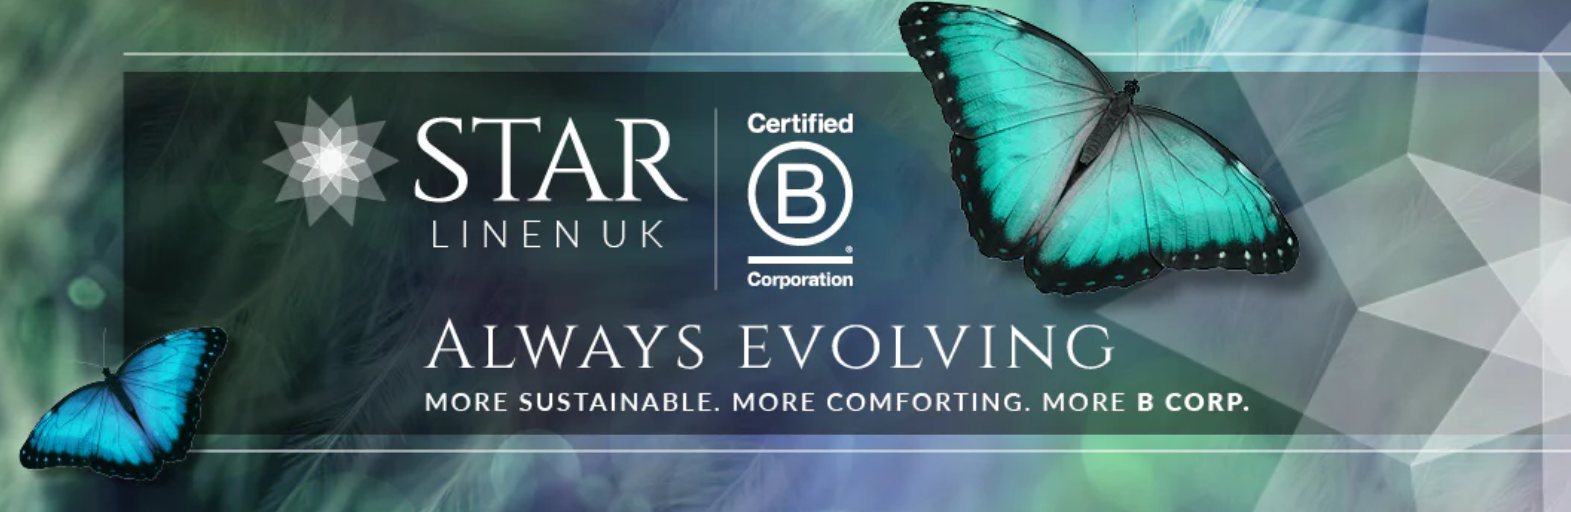 Star Linen UK sets sector sustainability benchmark with B Corps certification